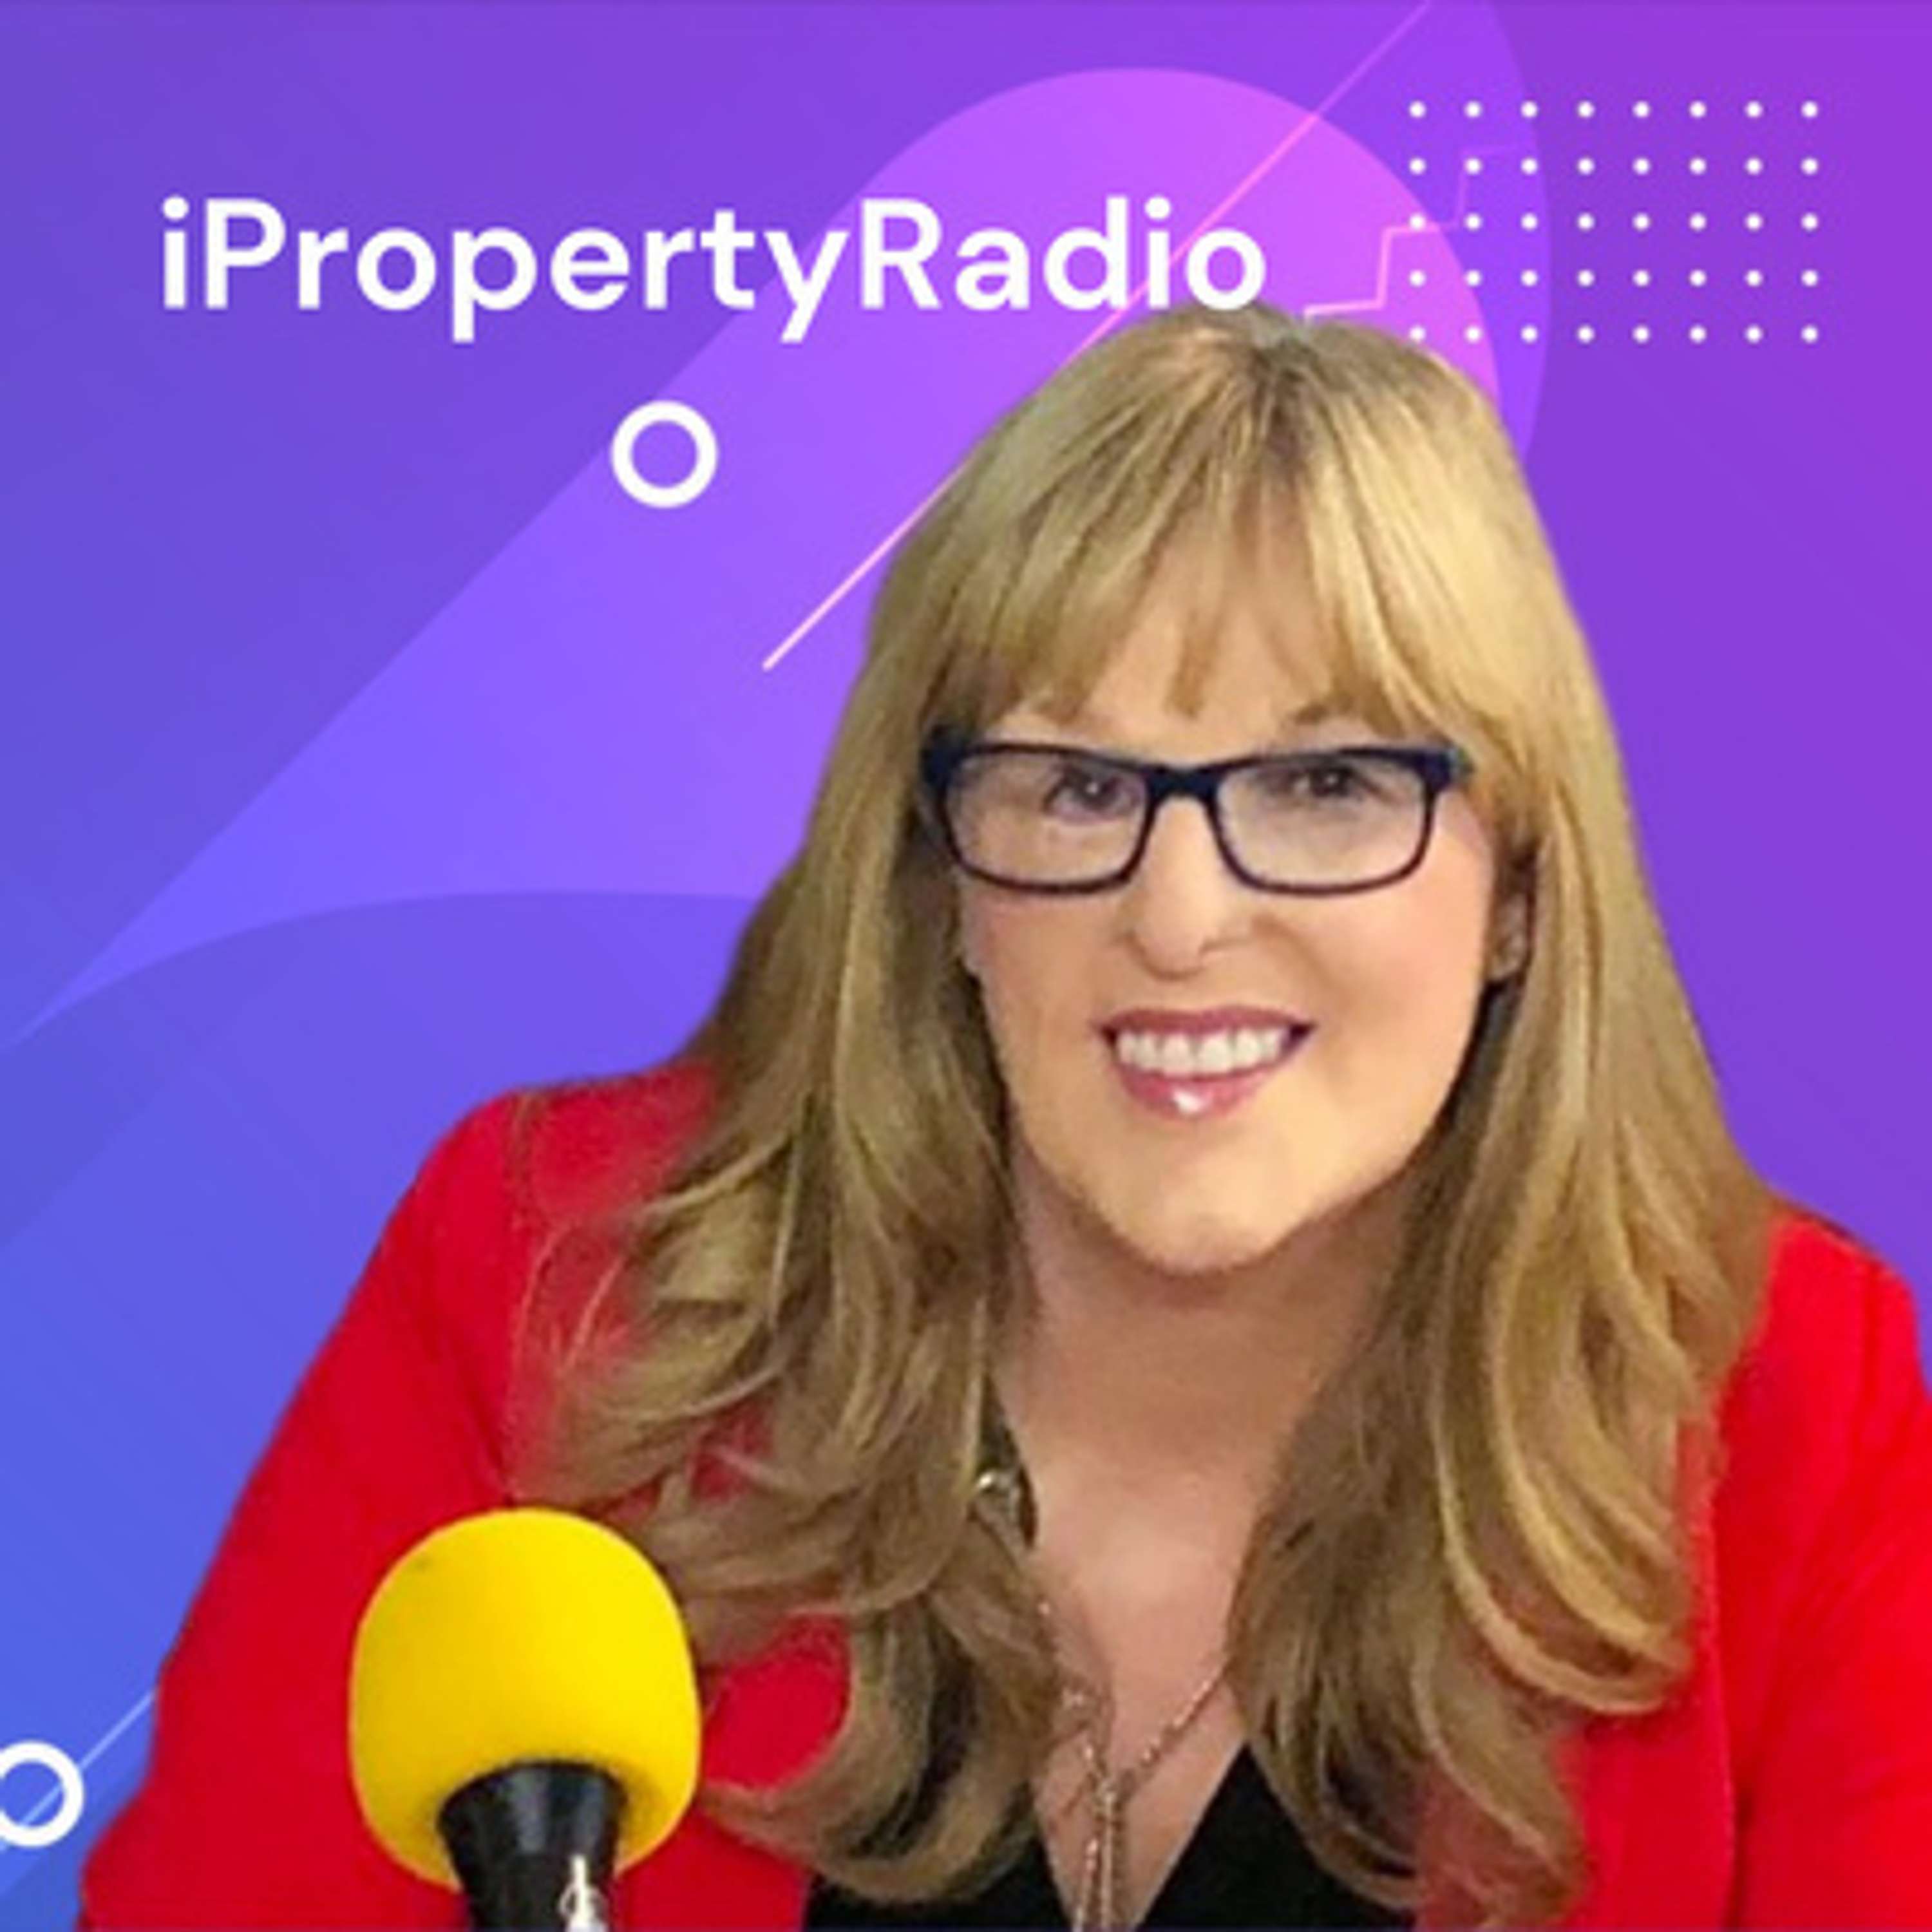 Ep. 5 iPropertyRadio Property Matters 26th February 2019 (Parts 2 & 3 - part 1 to follow!)